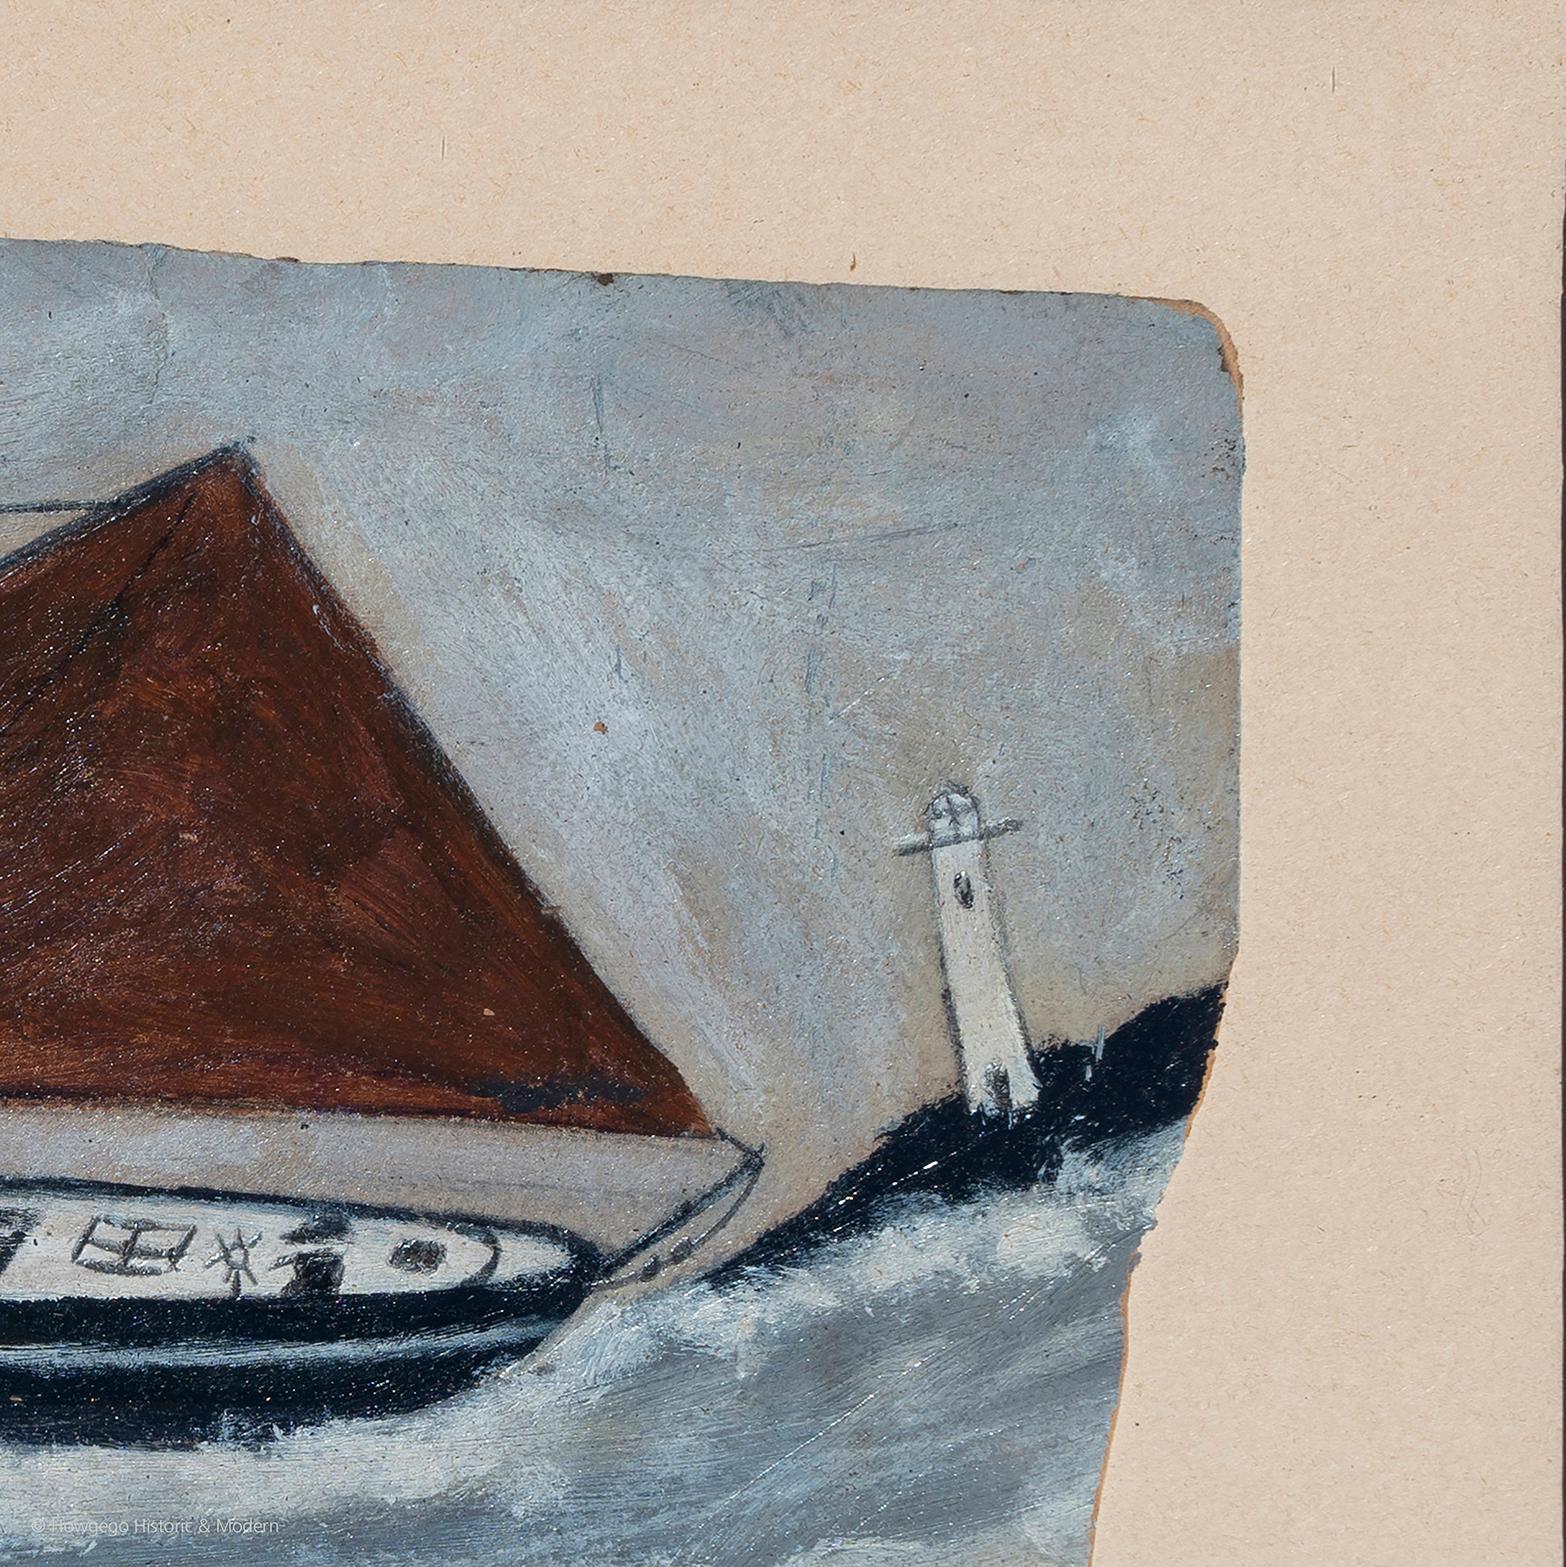 English Cutter Sailing Lighthouse Spirit of Alfred Wallis For Sale